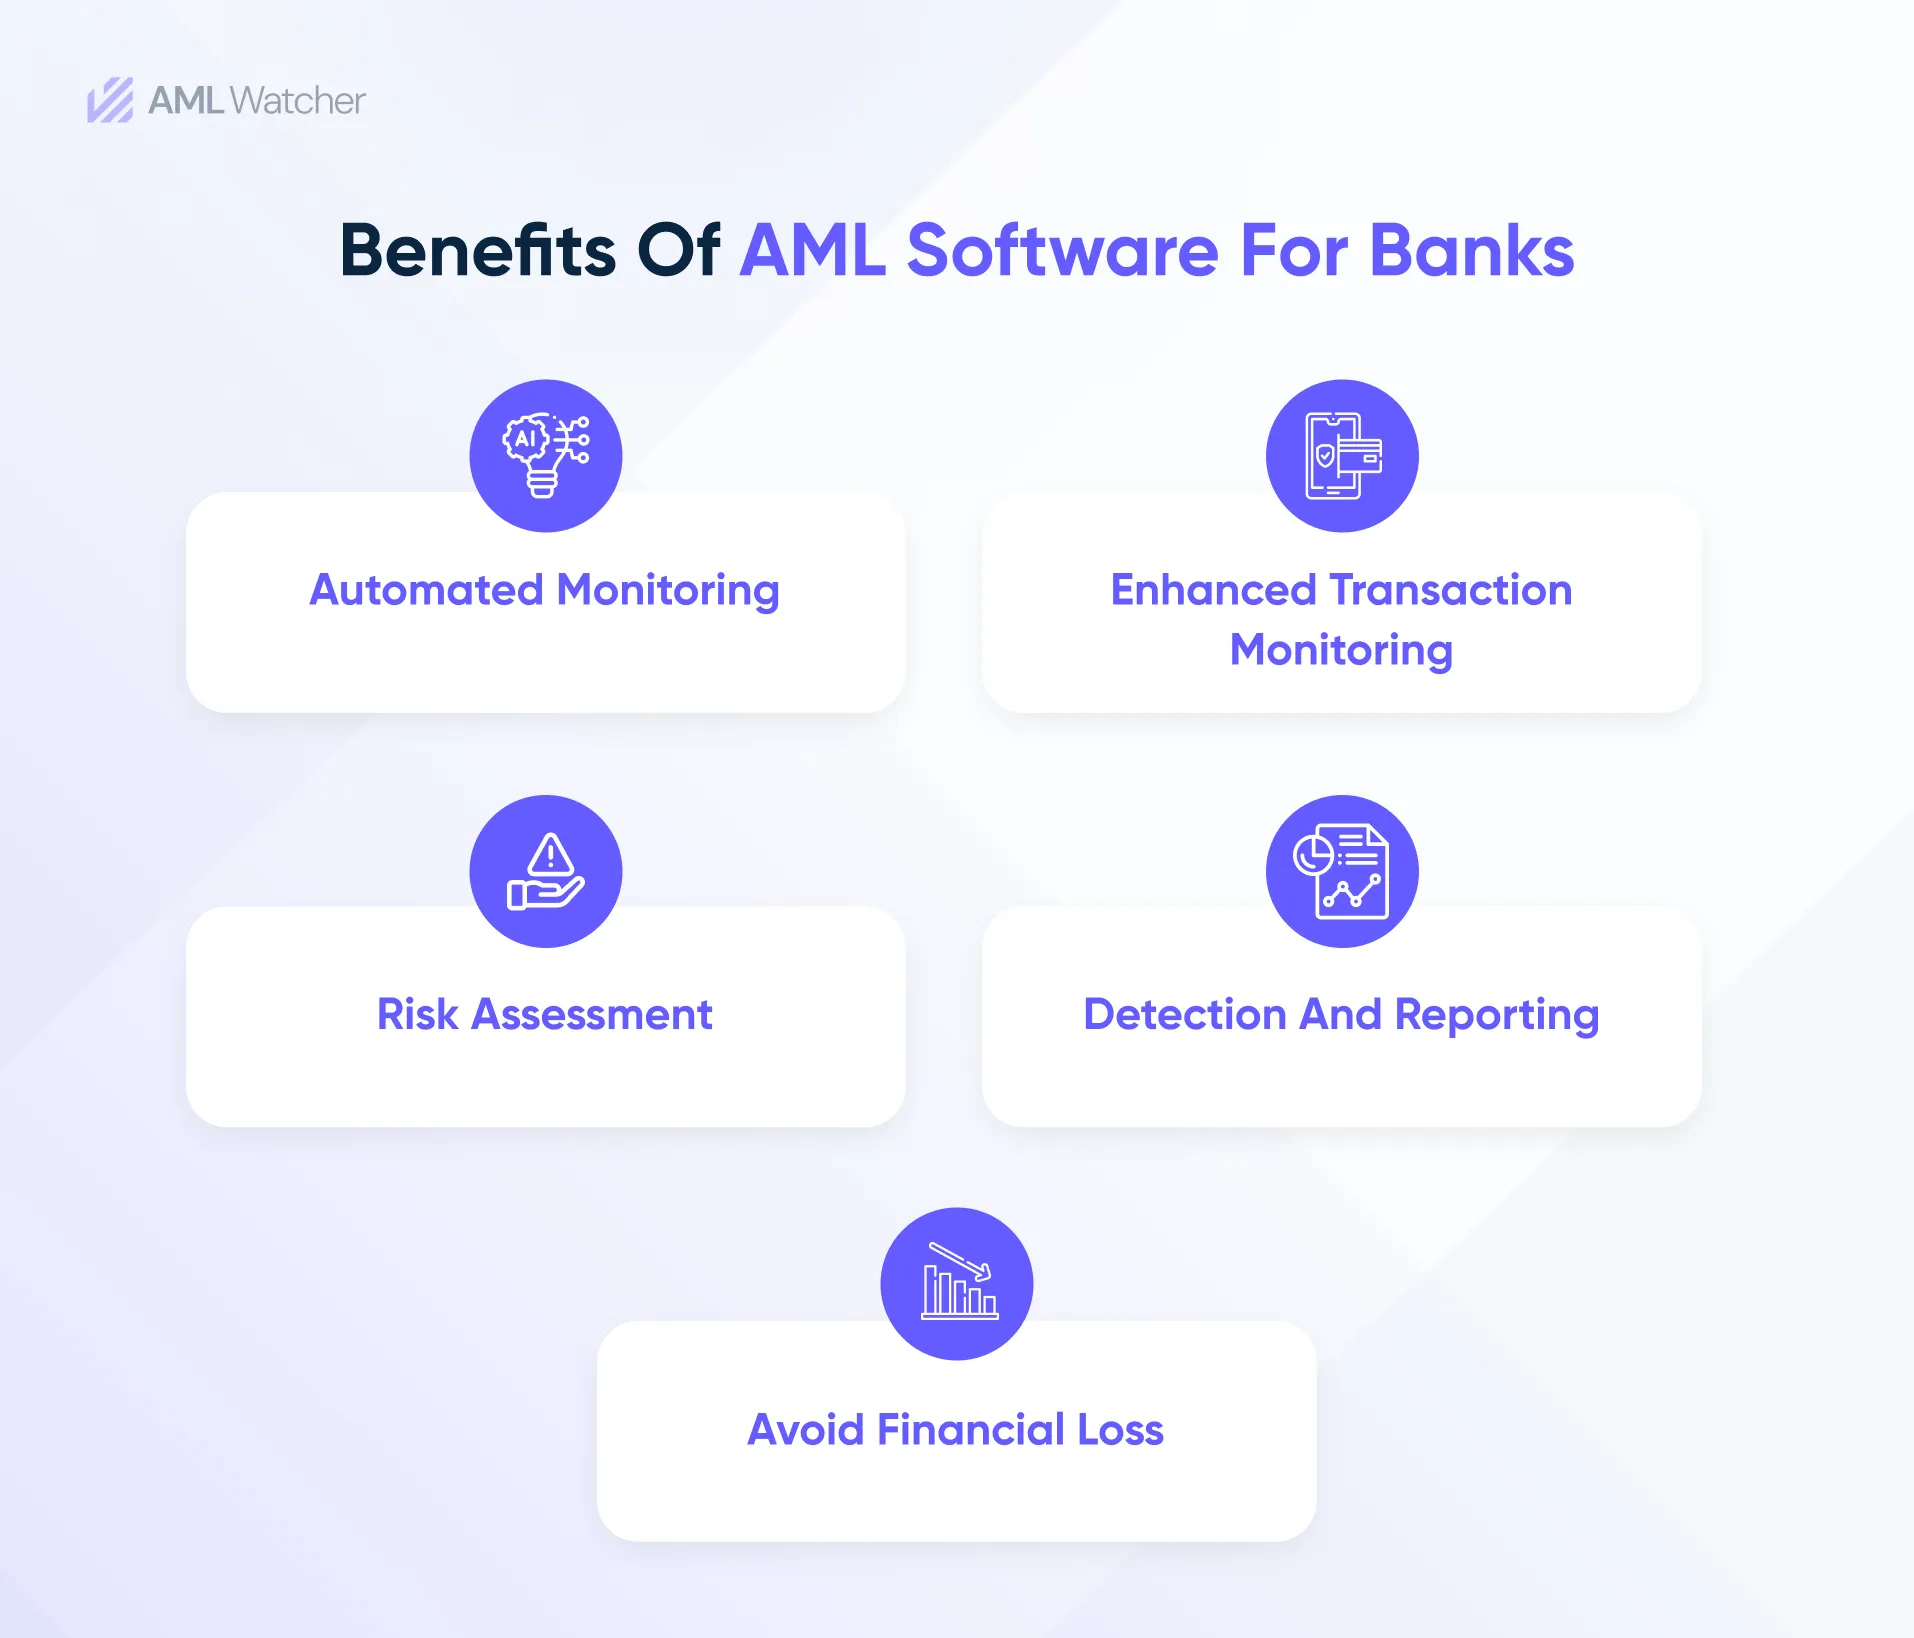 Benefits of AML software for Banks